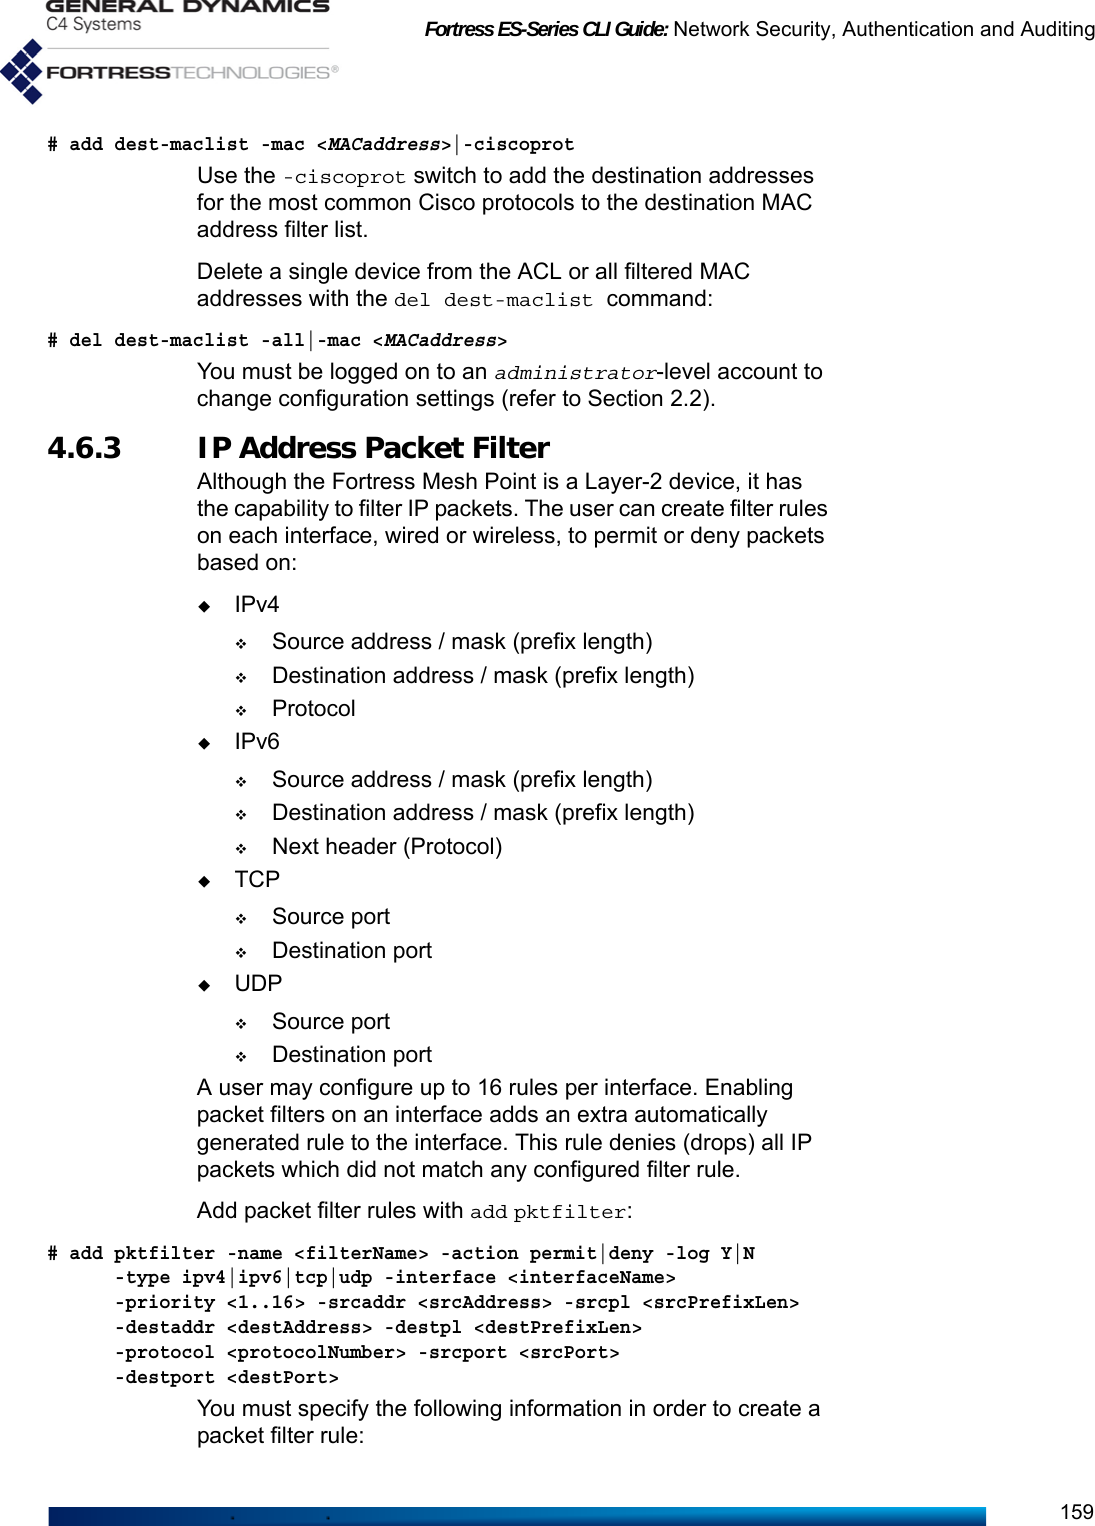 Fortress ES-Series CLI Guide: Network Security, Authentication and Auditing159# add dest-maclist -mac &lt;MACaddress&gt;|-ciscoprotUse the -ciscoprot switch to add the destination addresses for the most common Cisco protocols to the destination MAC address filter list.Delete a single device from the ACL or all filtered MAC addresses with the del dest-maclist command:# del dest-maclist -all|-mac &lt;MACaddress&gt;You must be logged on to an administrator-level account to change configuration settings (refer to Section 2.2).4.6.3 IP Address Packet FilterAlthough the Fortress Mesh Point is a Layer-2 device, it has the capability to filter IP packets. The user can create filter rules on each interface, wired or wireless, to permit or deny packets based on:IPv4Source address / mask (prefix length)Destination address / mask (prefix length)ProtocolIPv6Source address / mask (prefix length)Destination address / mask (prefix length)Next header (Protocol)TCPSource portDestination portUDPSource portDestination portA user may configure up to 16 rules per interface. Enabling packet filters on an interface adds an extra automatically generated rule to the interface. This rule denies (drops) all IP packets which did not match any configured filter rule.Add packet filter rules with add pktfilter:# add pktfilter -name &lt;filterName&gt; -action permit|deny -log Y|N      -type ipv4|ipv6|tcp|udp -interface &lt;interfaceName&gt;      -priority &lt;1..16&gt; -srcaddr &lt;srcAddress&gt; -srcpl &lt;srcPrefixLen&gt;      -destaddr &lt;destAddress&gt; -destpl &lt;destPrefixLen&gt;      -protocol &lt;protocolNumber&gt; -srcport &lt;srcPort&gt;       -destport &lt;destPort&gt;You must specify the following information in order to create a packet filter rule: